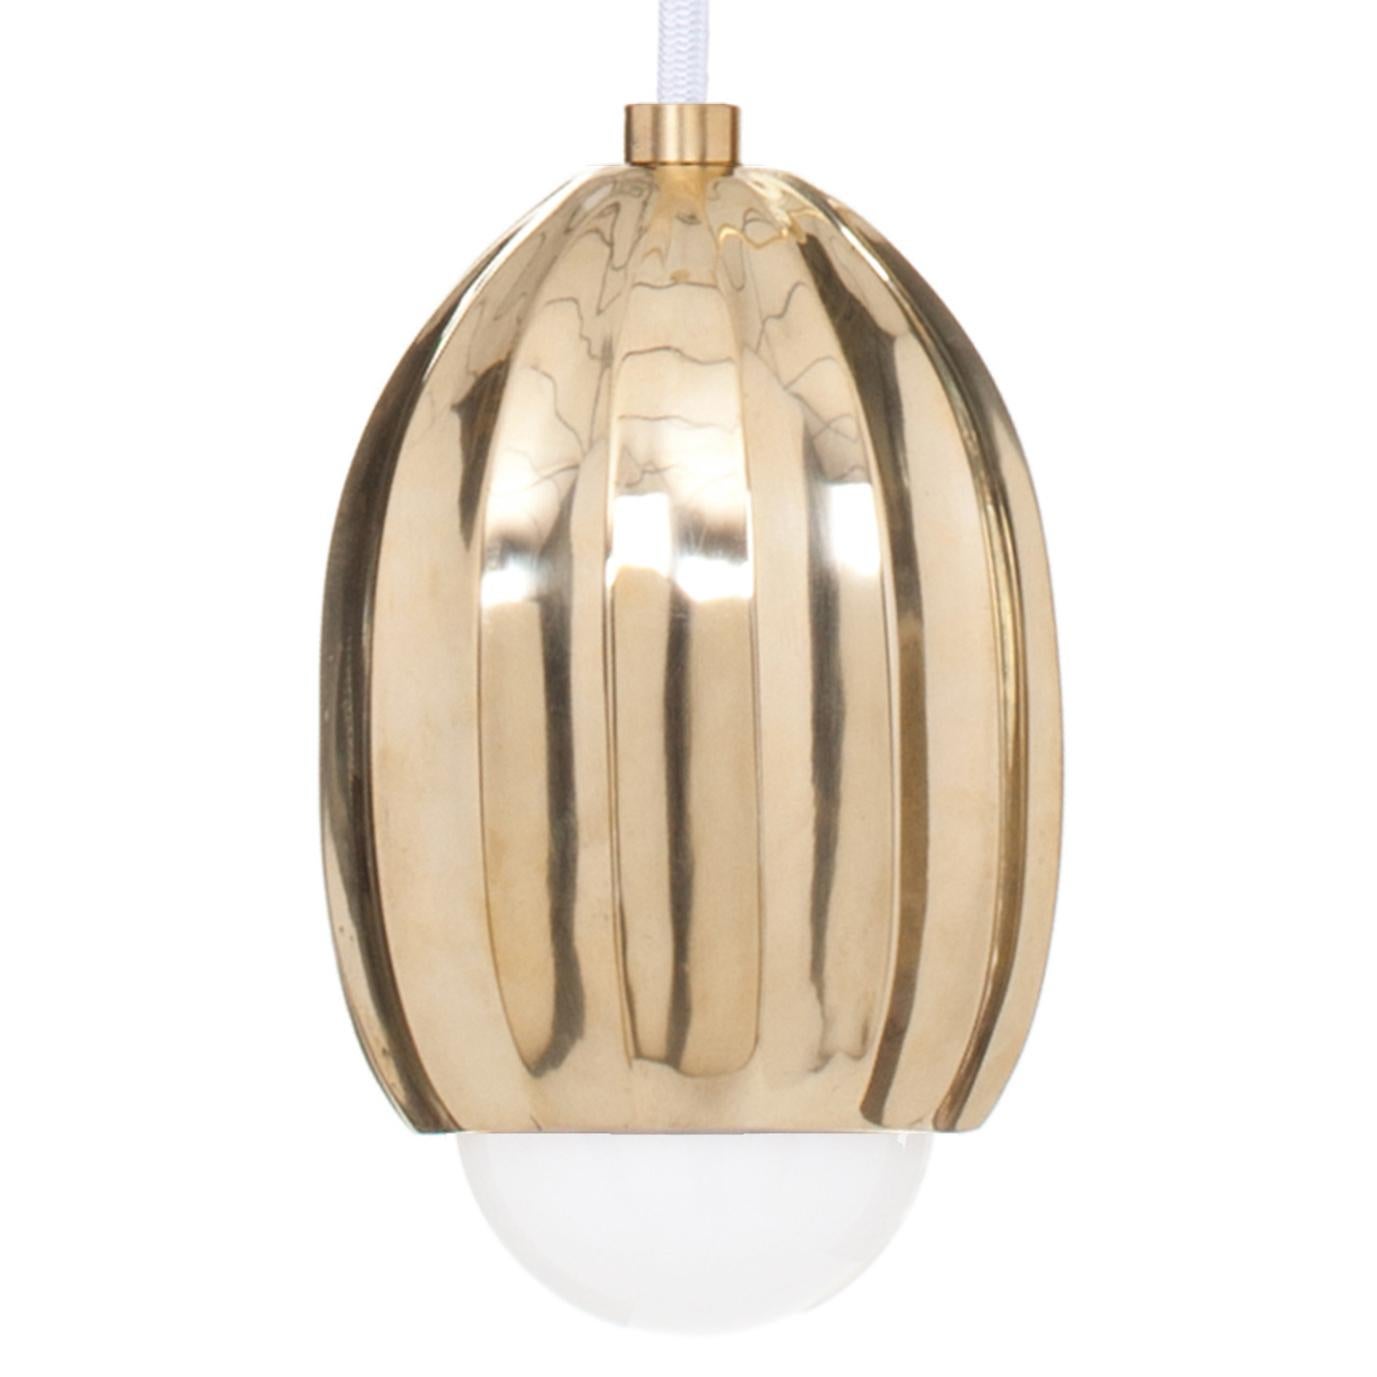 Poppy Polished Brass Pendant Lamp by Fred and Juul
Dimensions: Ø 10 x D 300 cm.
Materials: Polished brass.

Available in polished brass or blackened brass. Cord length can be extended on request. Custom sizes, materials or finishes are available on